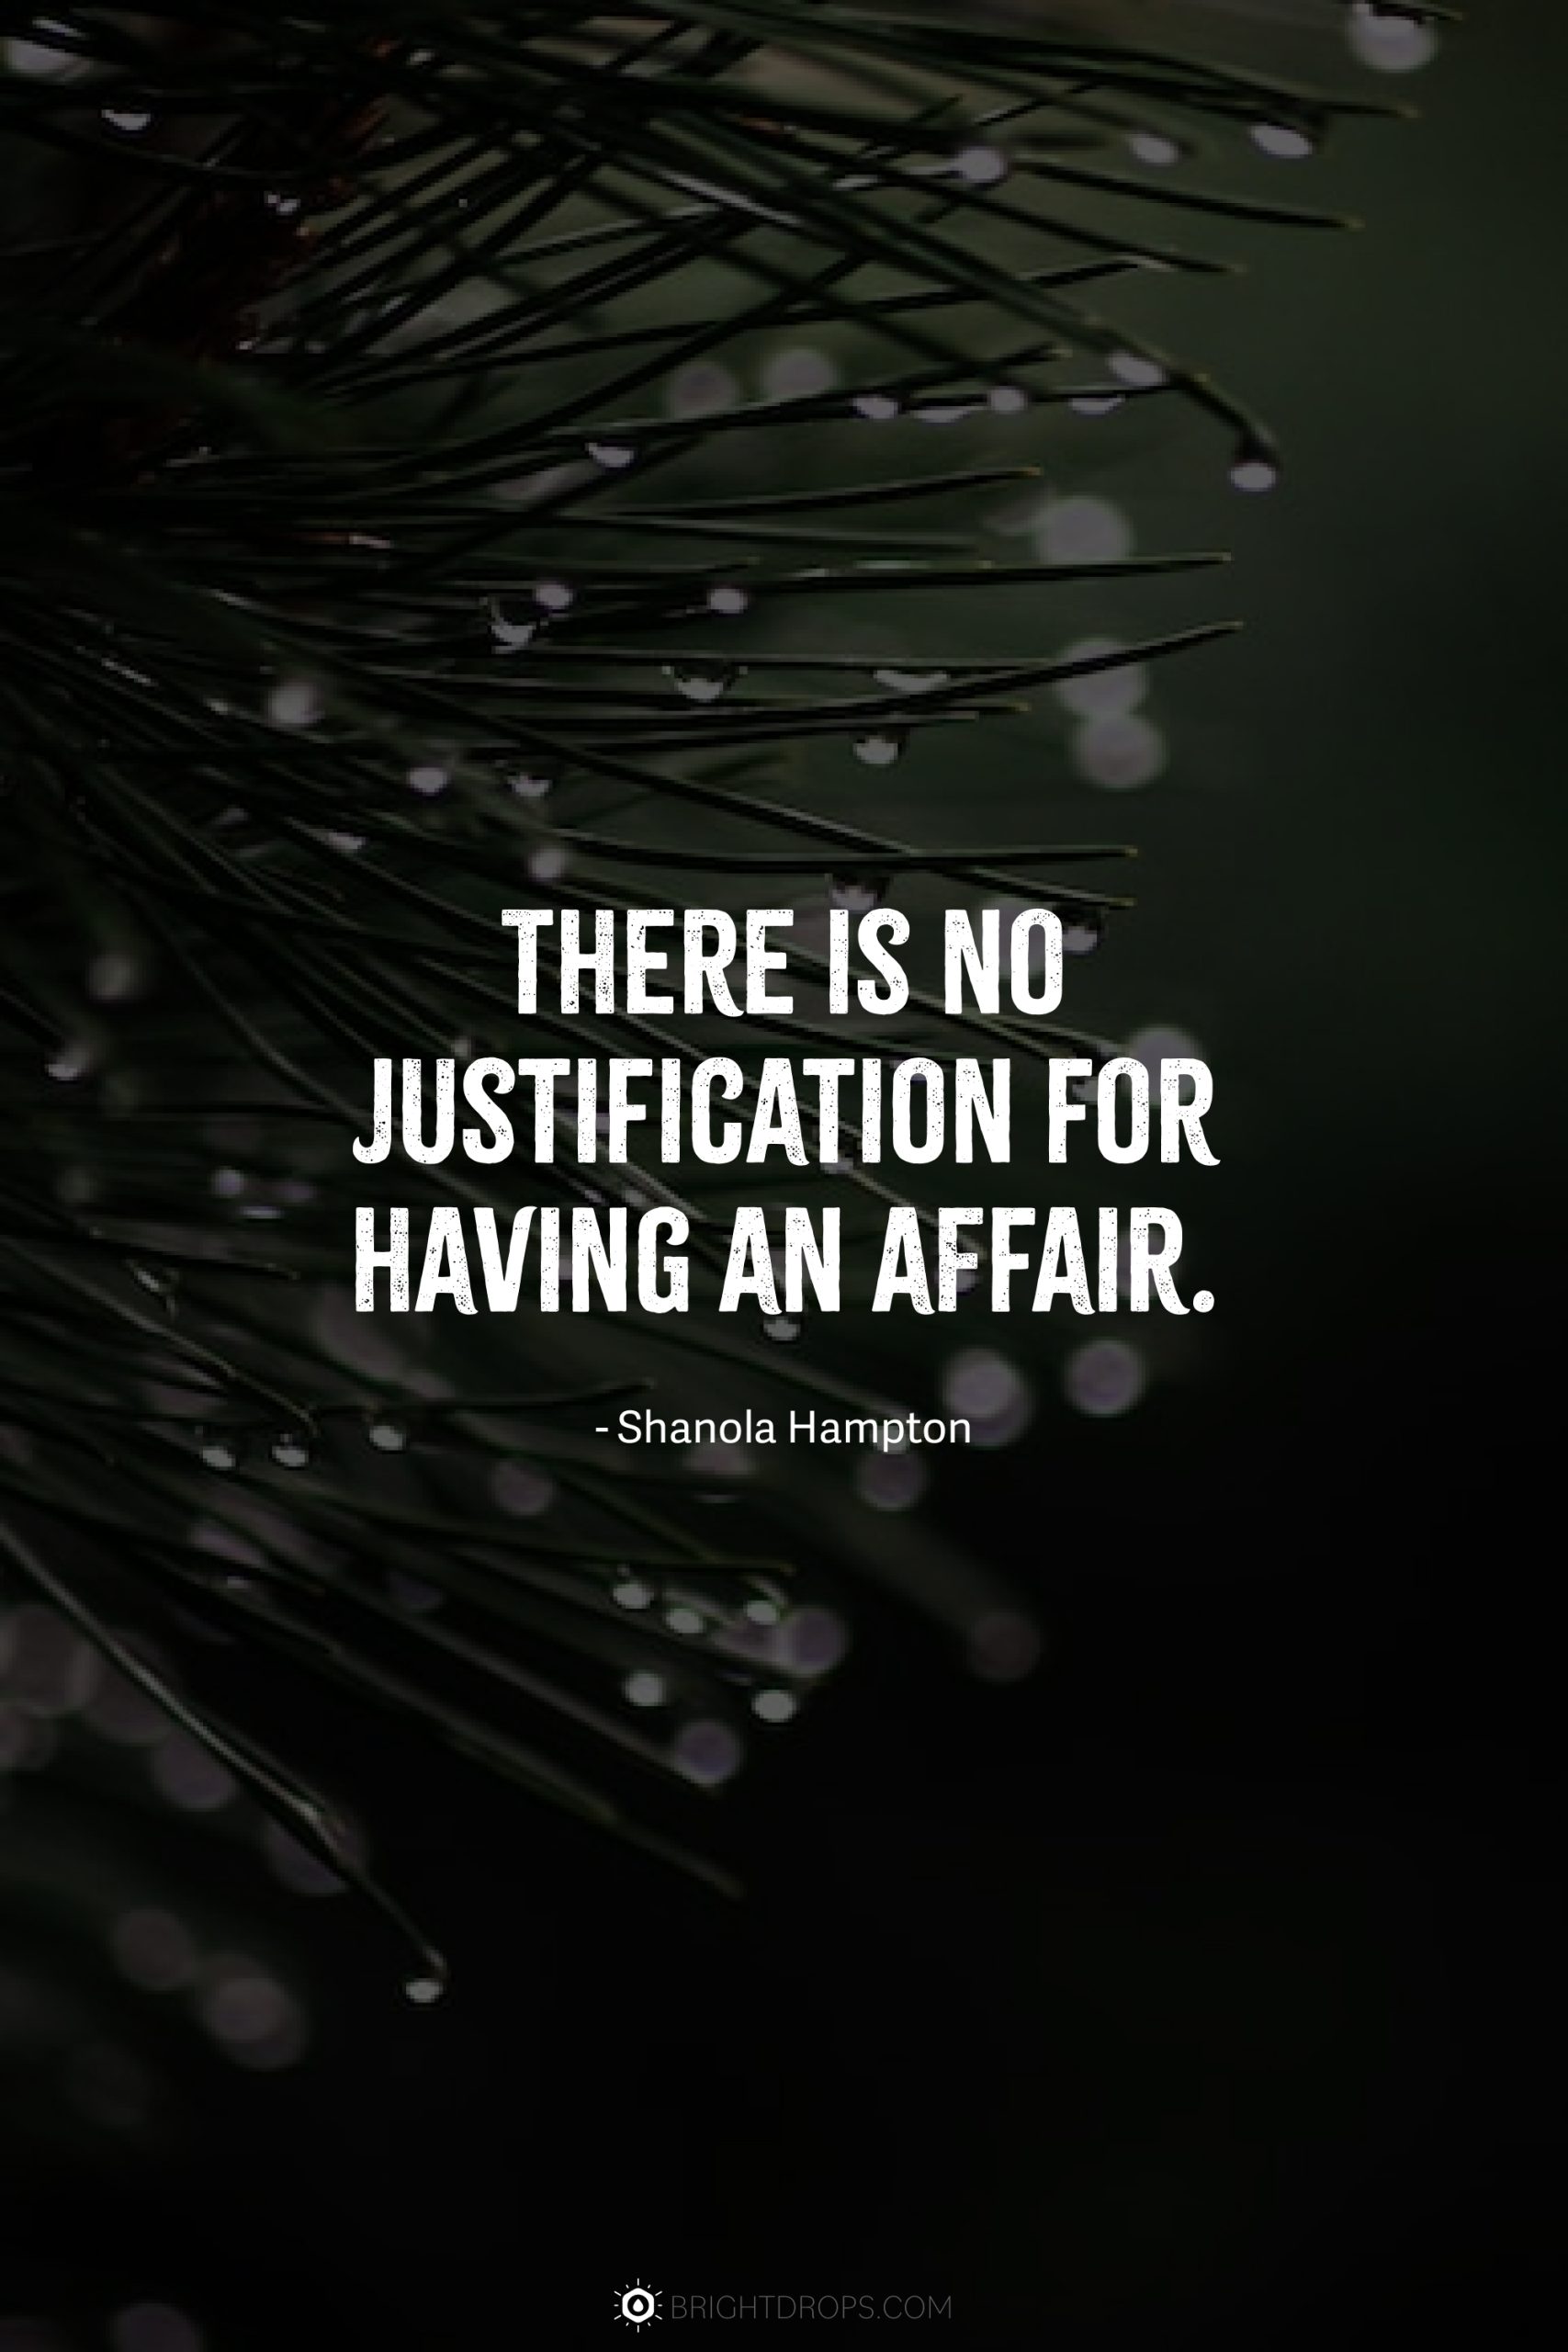 There is no justification for having an affair.